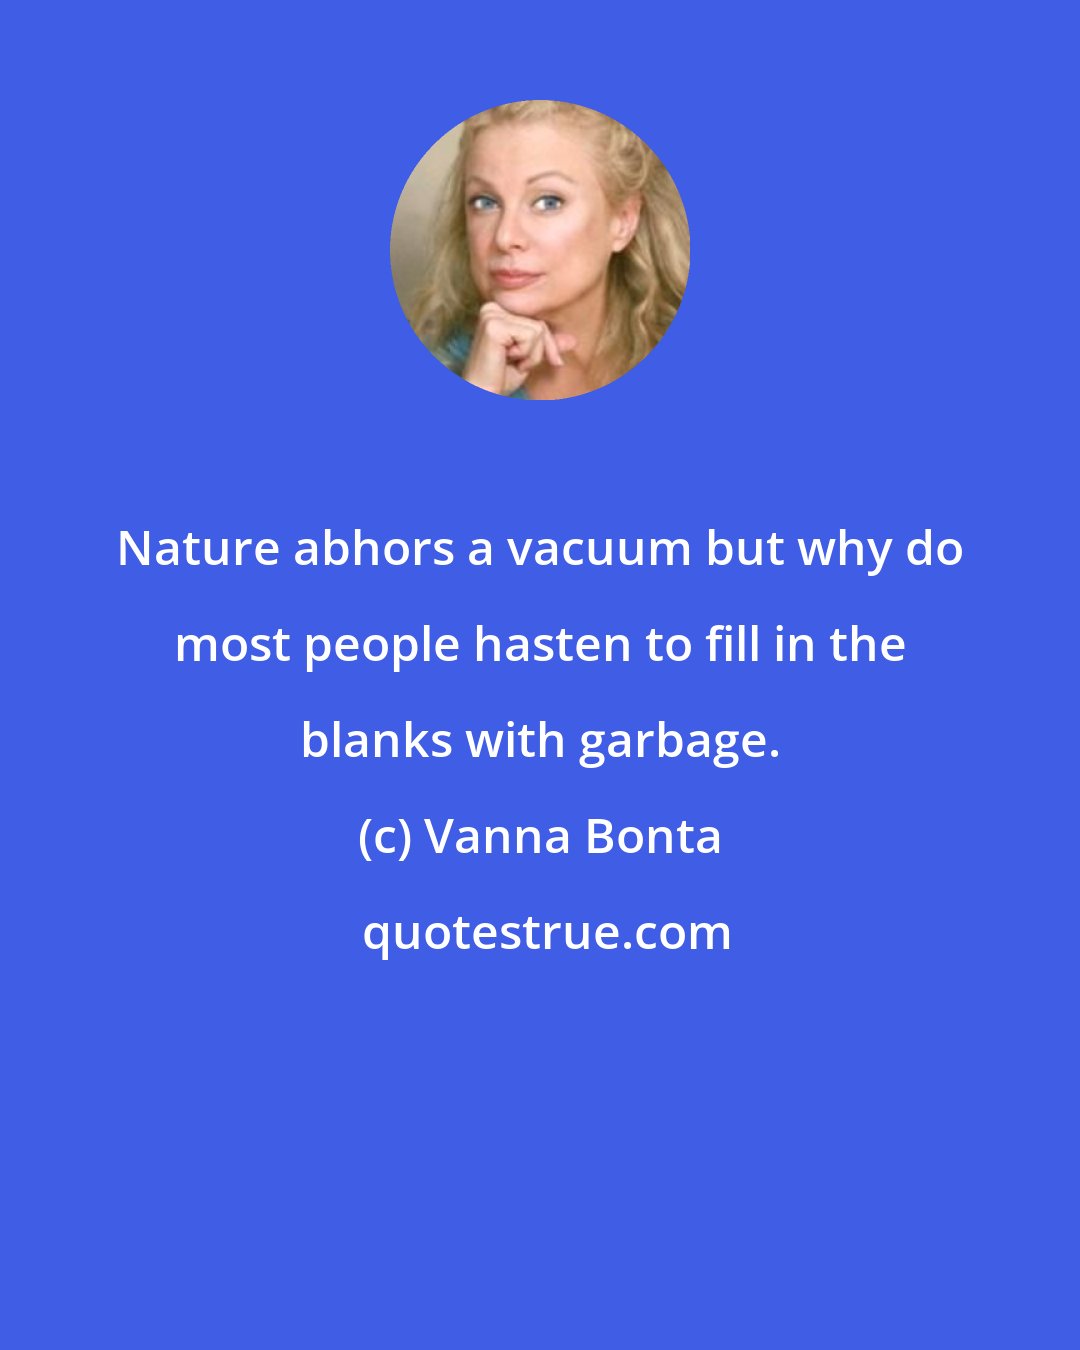 Vanna Bonta: Nature abhors a vacuum but why do most people hasten to fill in the blanks with garbage.